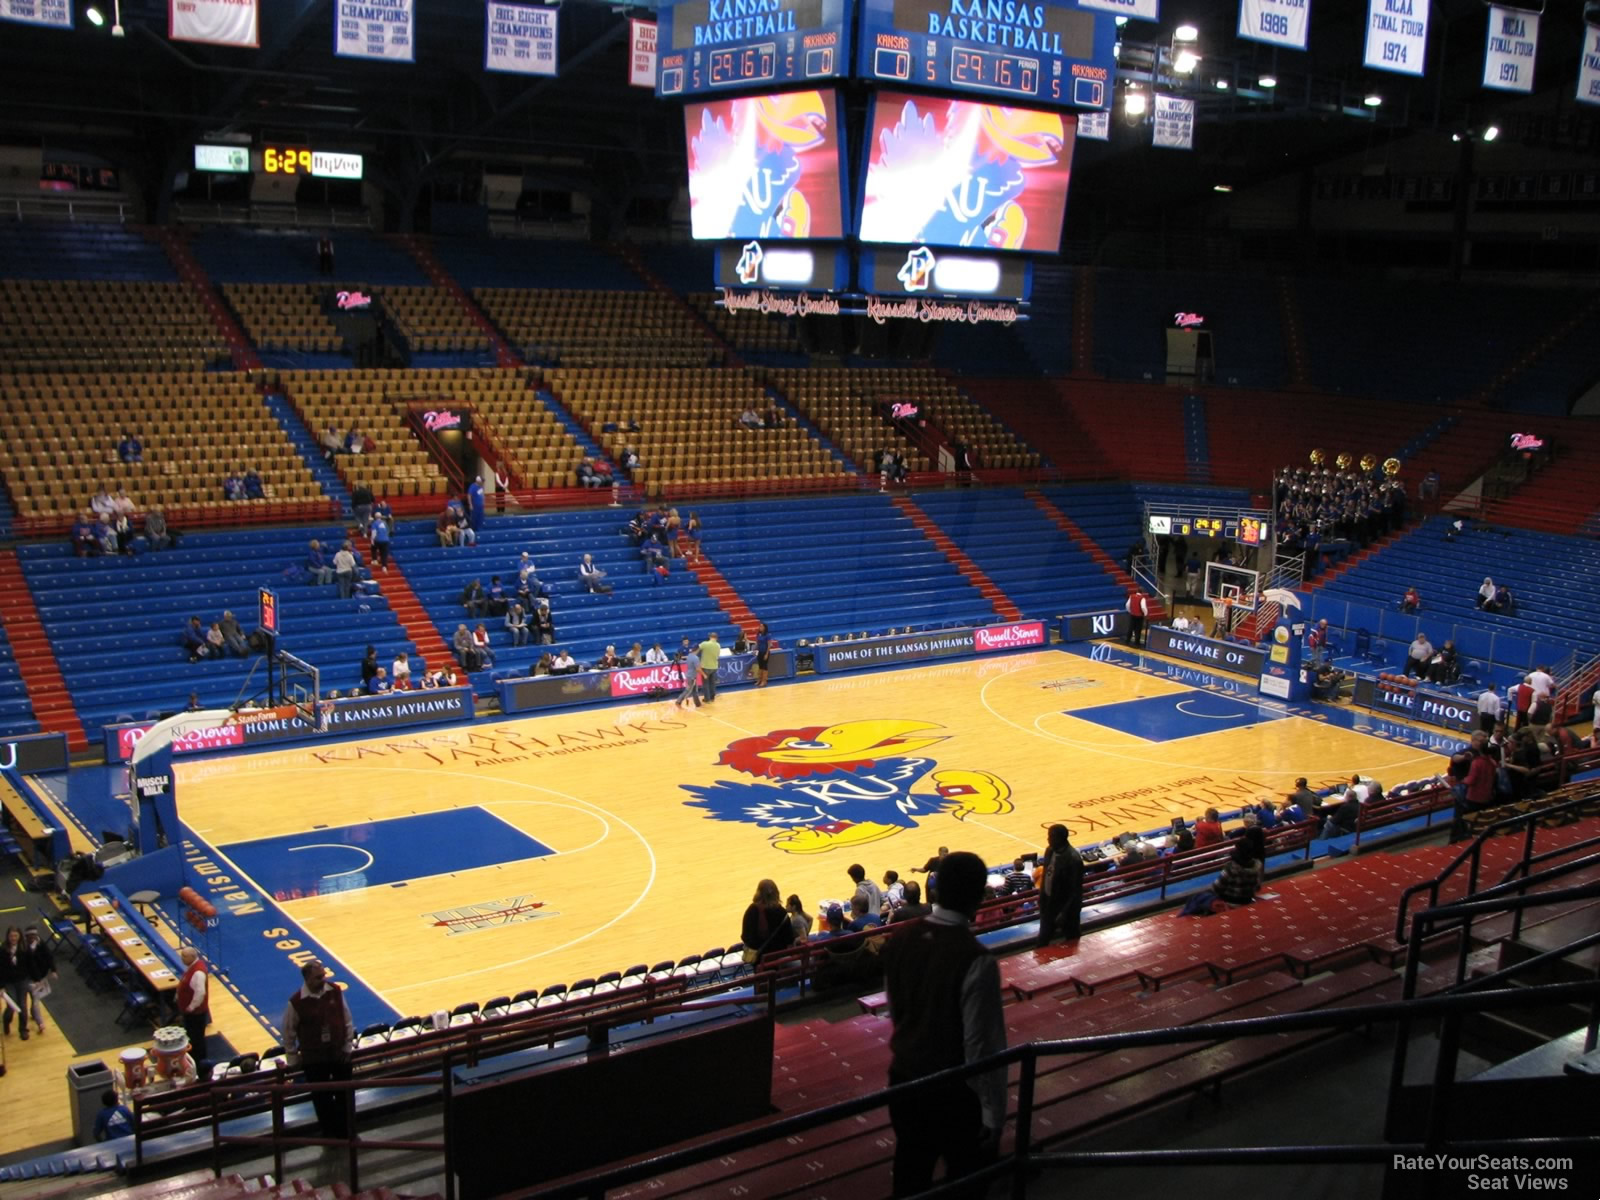 section 20, row 18 seat view  - allen fieldhouse